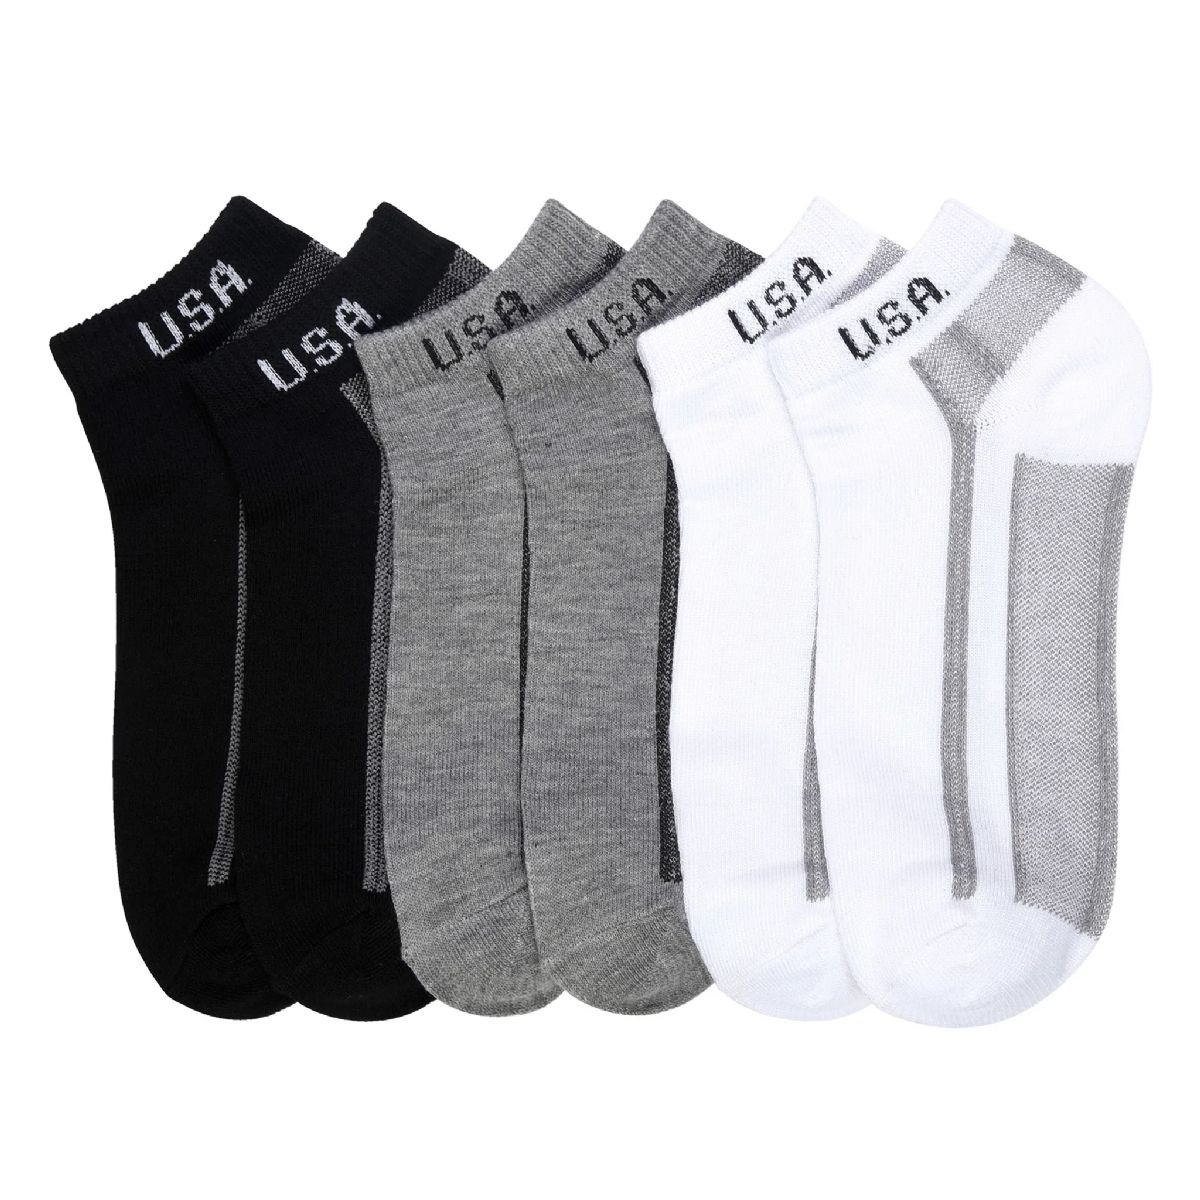 360 Pairs Cotton Ankle Sock Usa Printed Size 4-6 - Kids Socks for Homeless and Charity